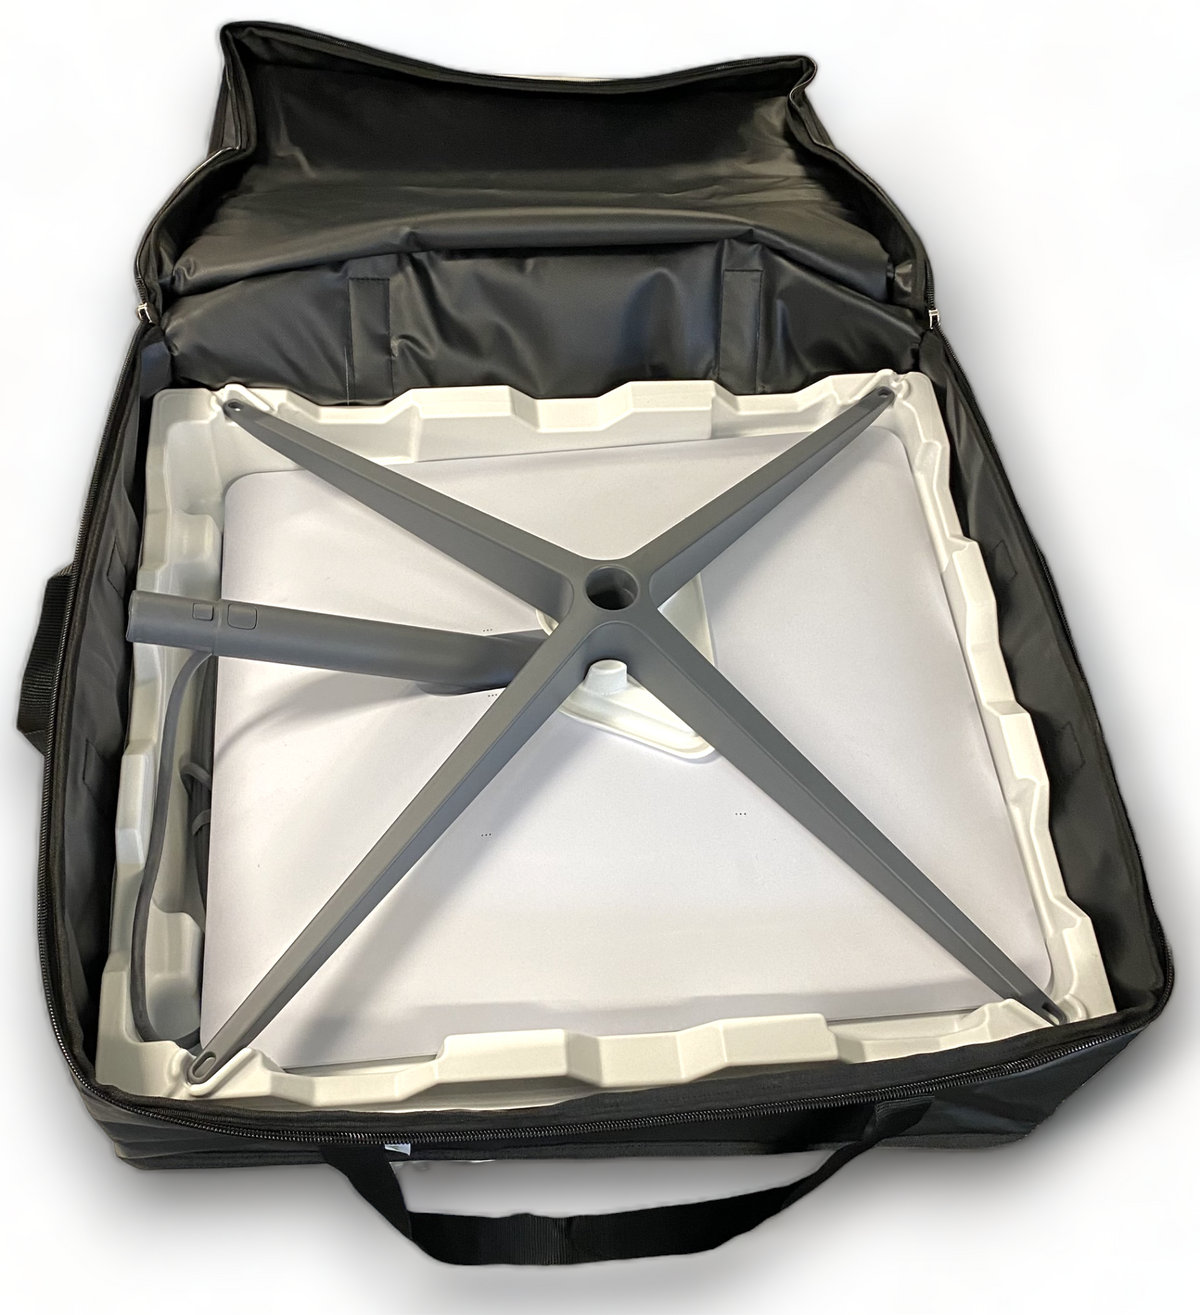 Padded Bag For Starlink High Performance Dish